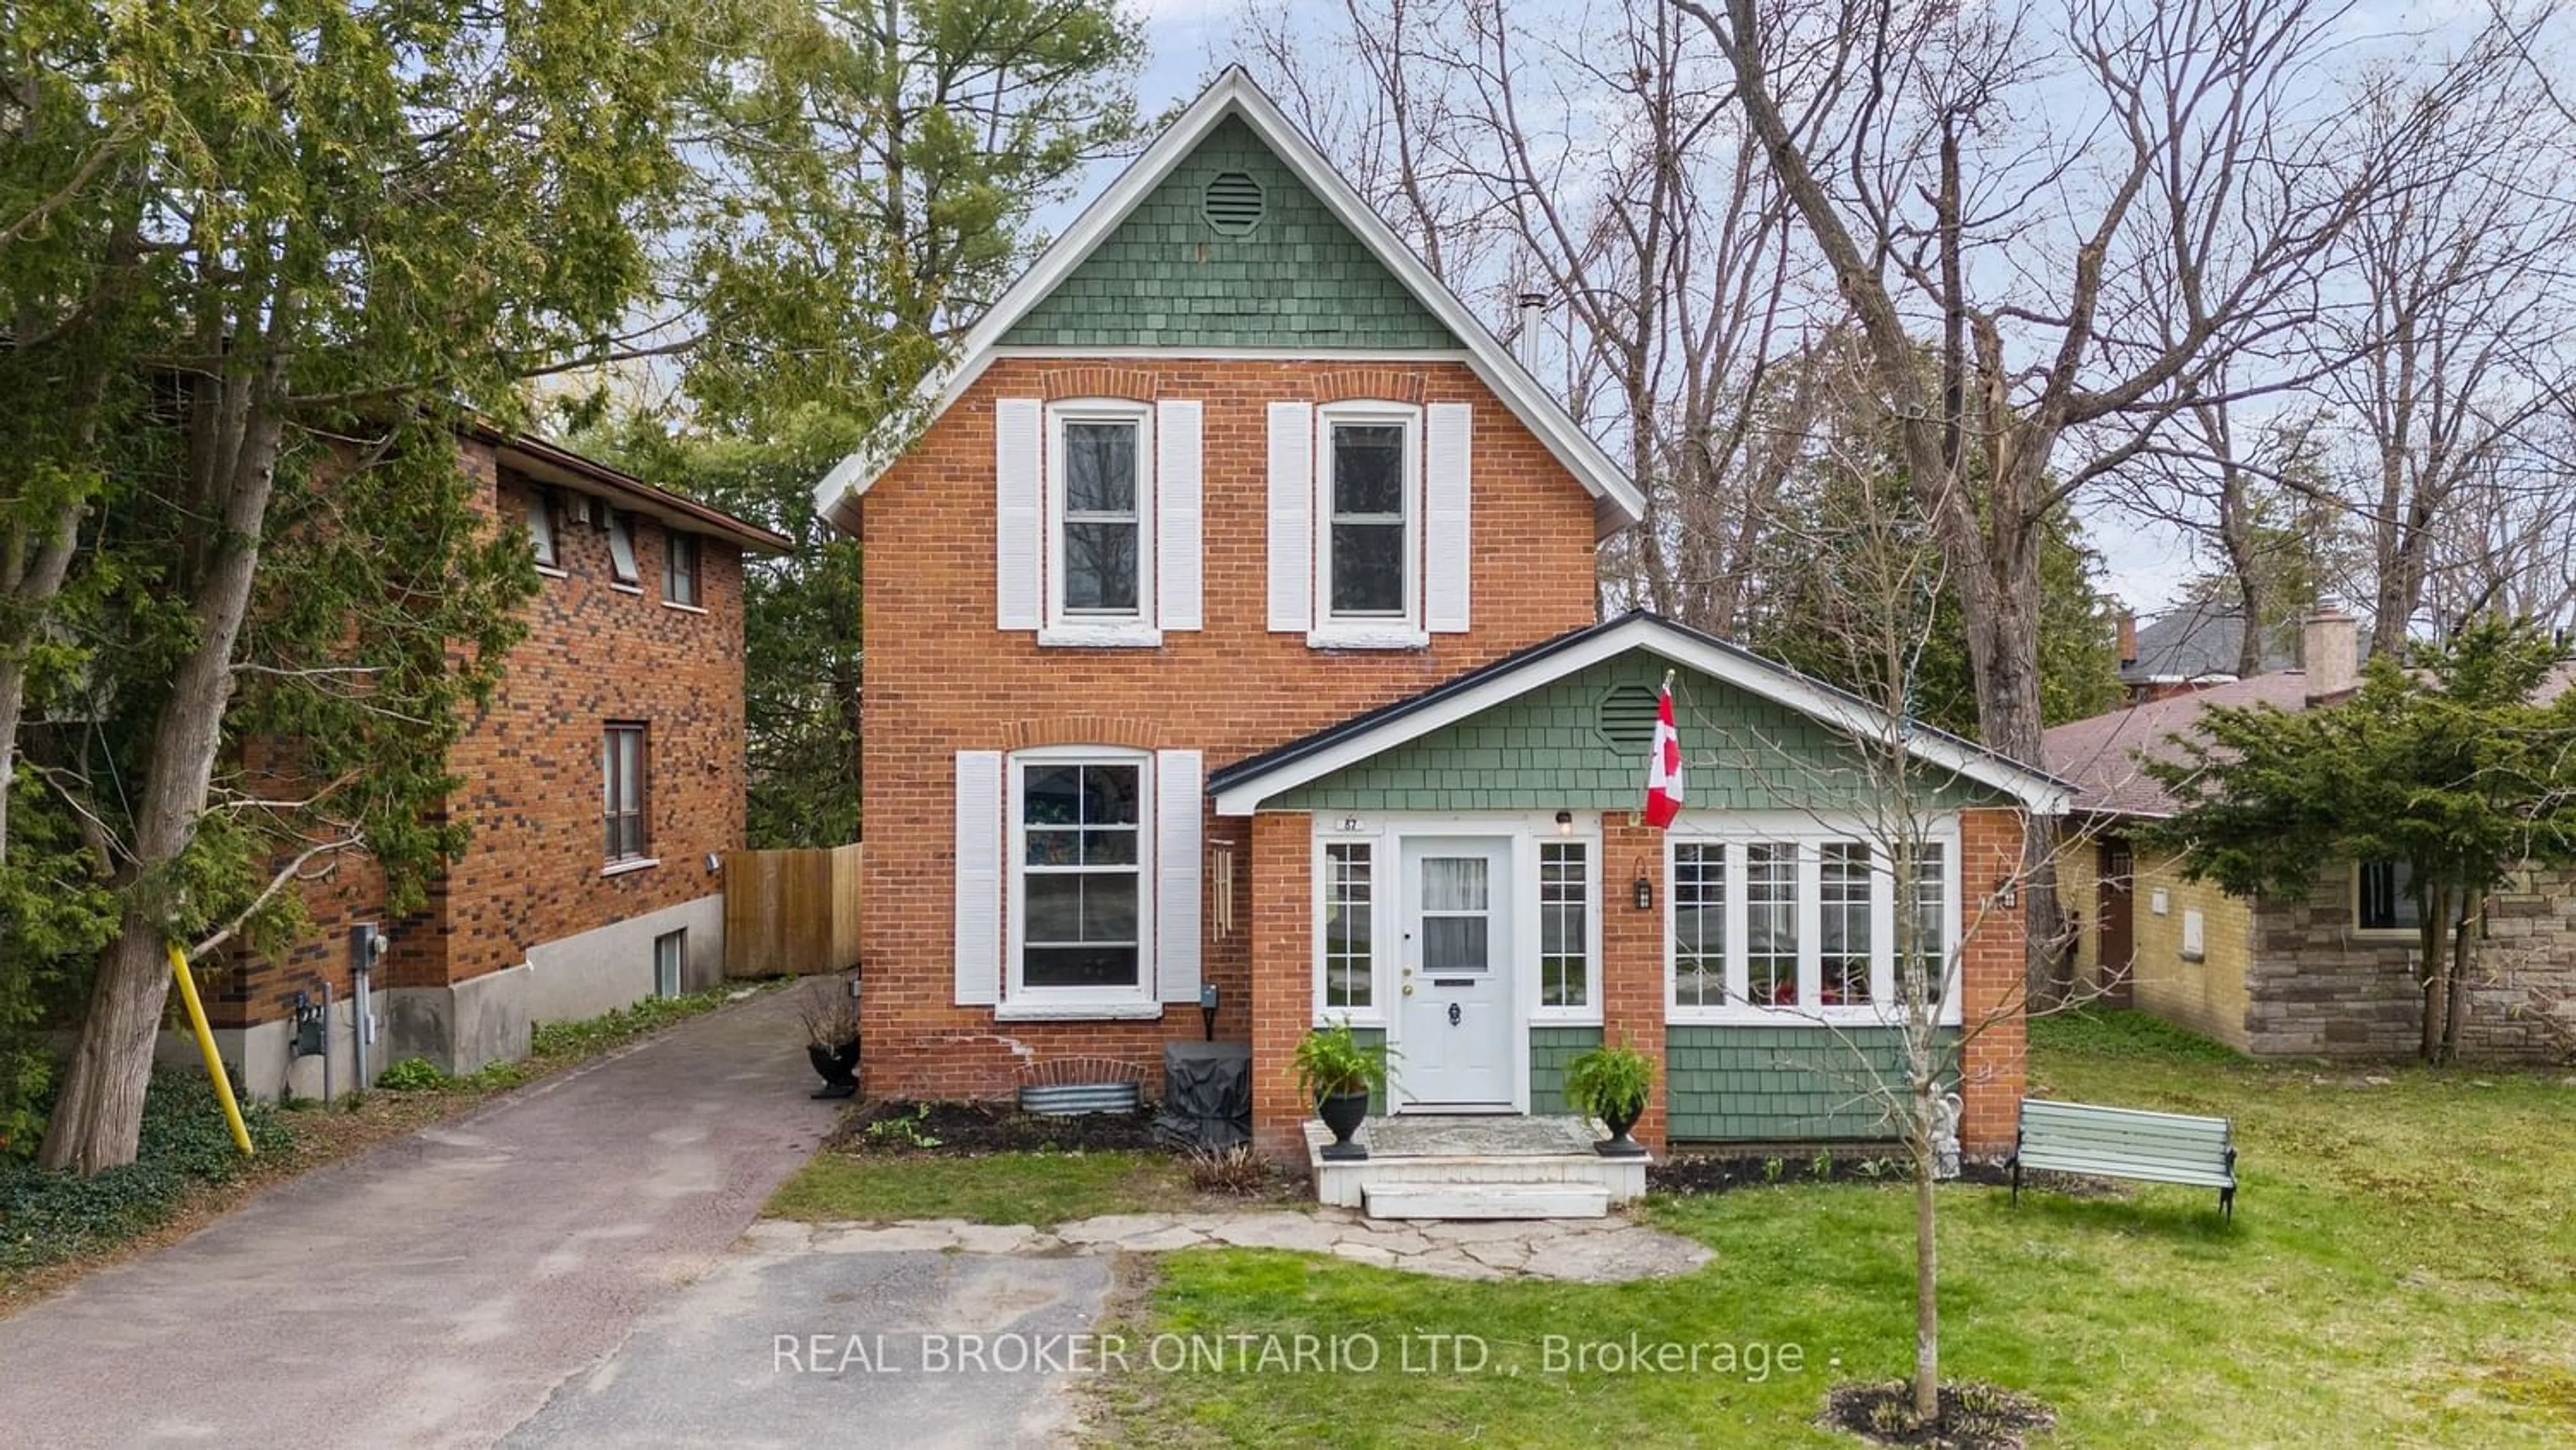 Home with brick exterior material for 87 Mcmurray St, Bracebridge Ontario P1L 1R8